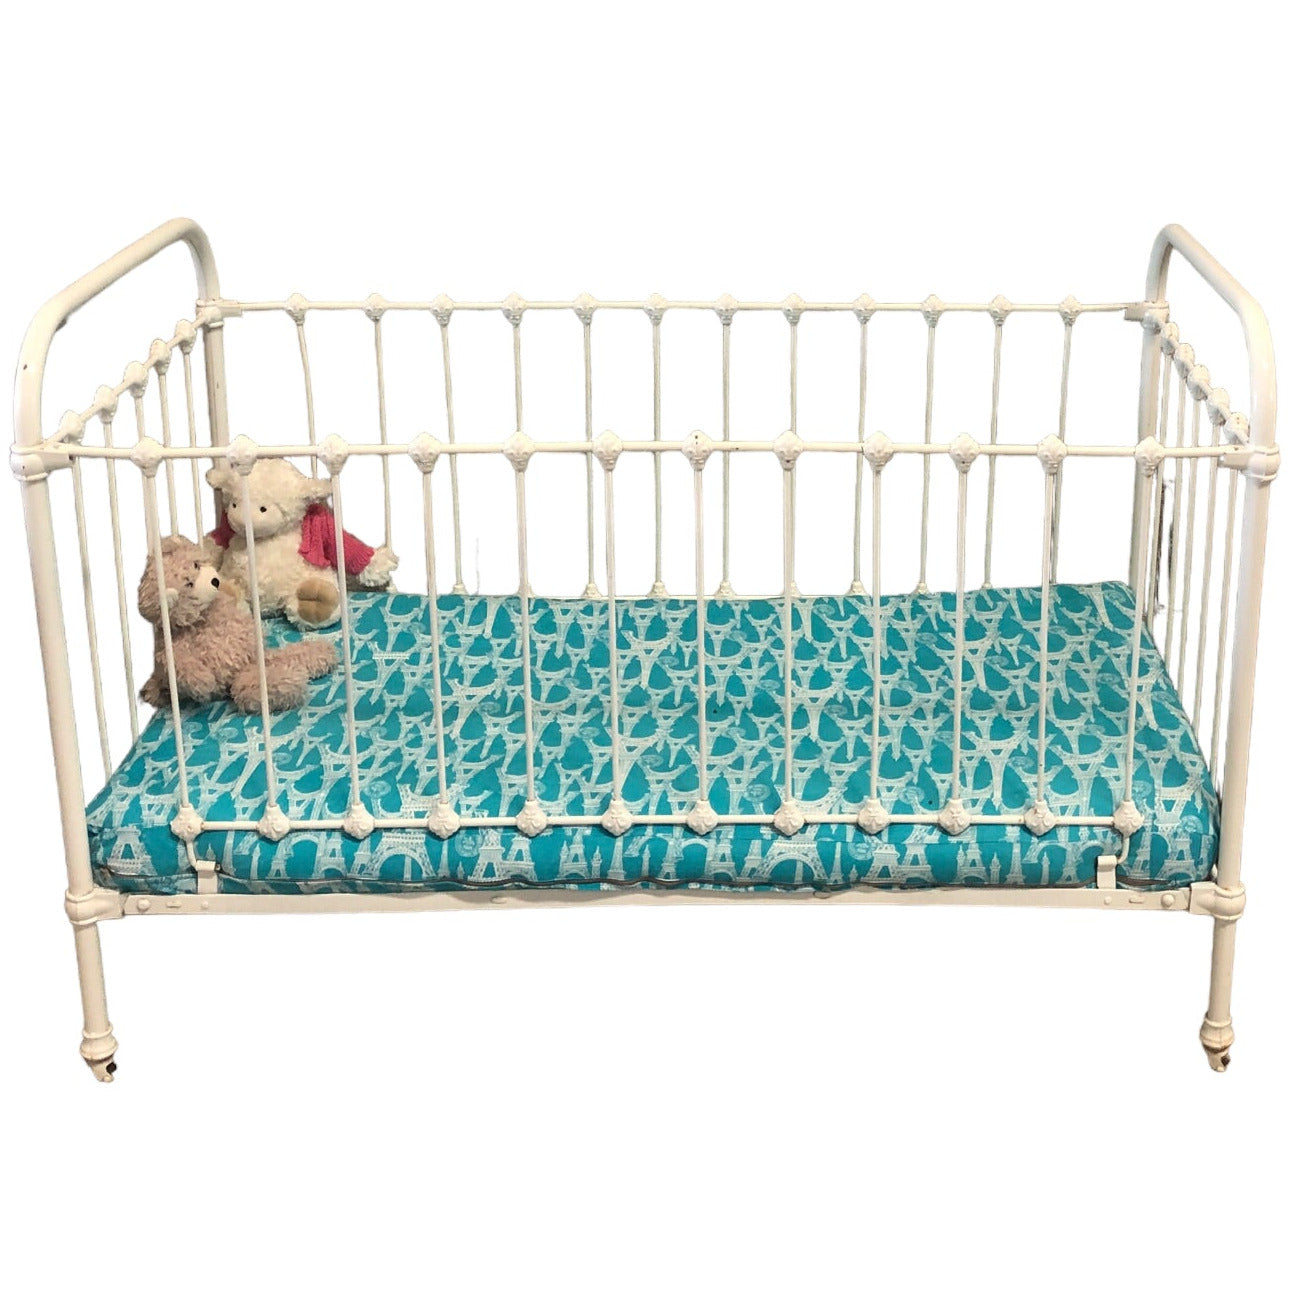 Vide Maison Riviera - Wrought iron baby bed for young child

